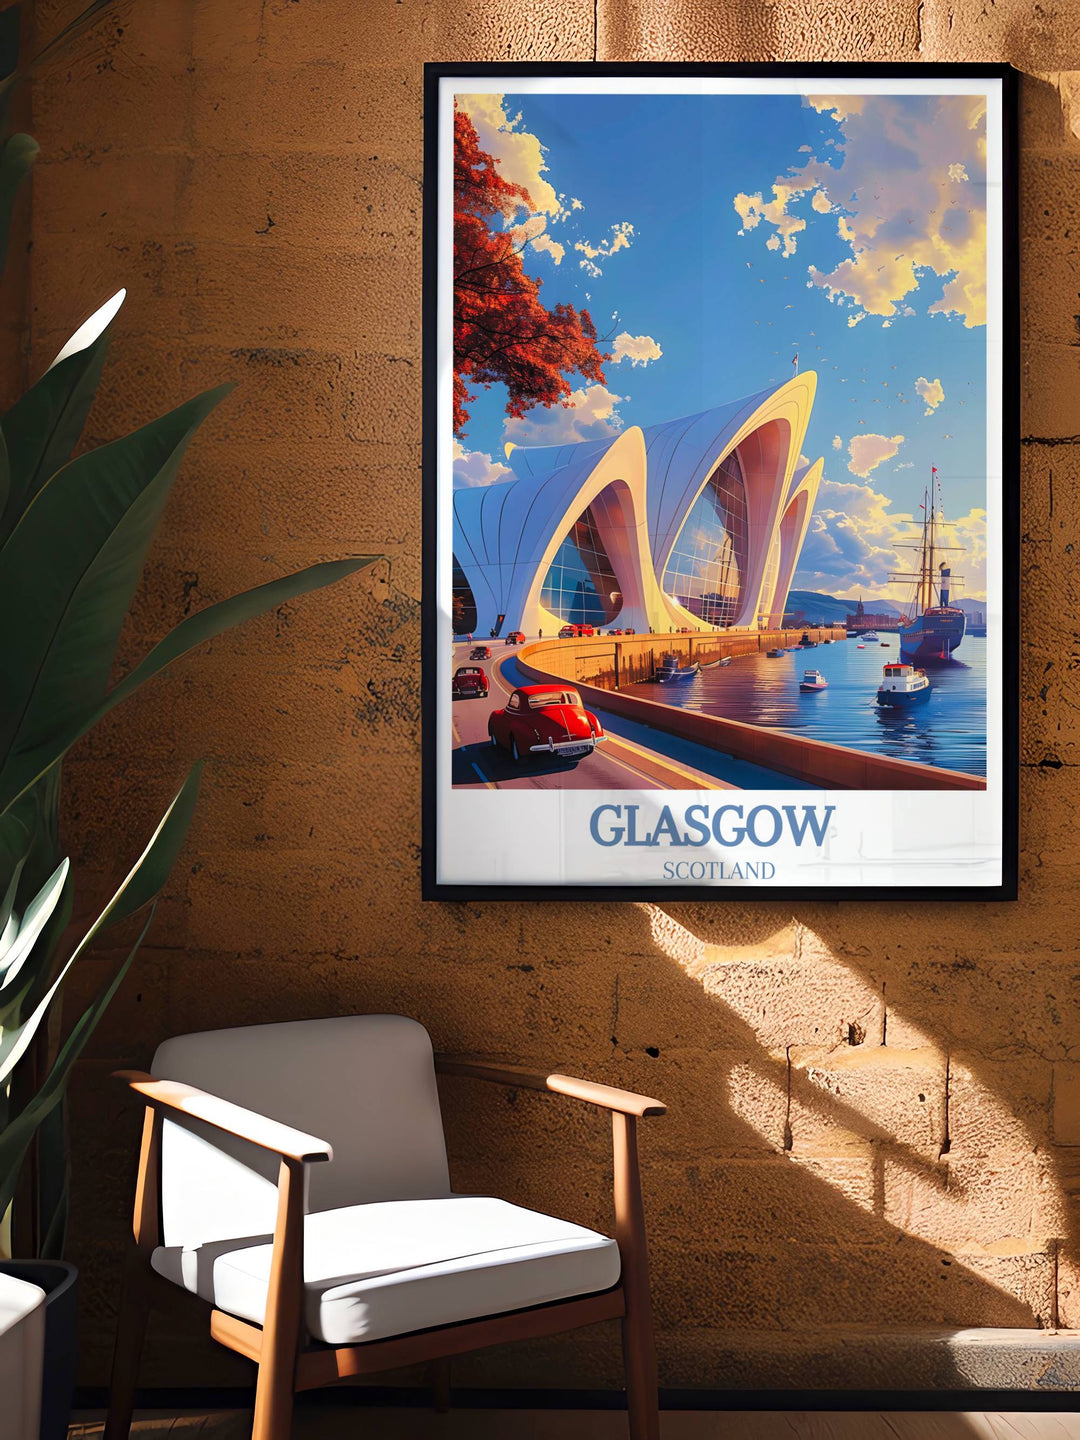 Transport yourself to Glasgows lively culture with vibrant posters capturing its bustling streets and vibrant energy, exclusively available.